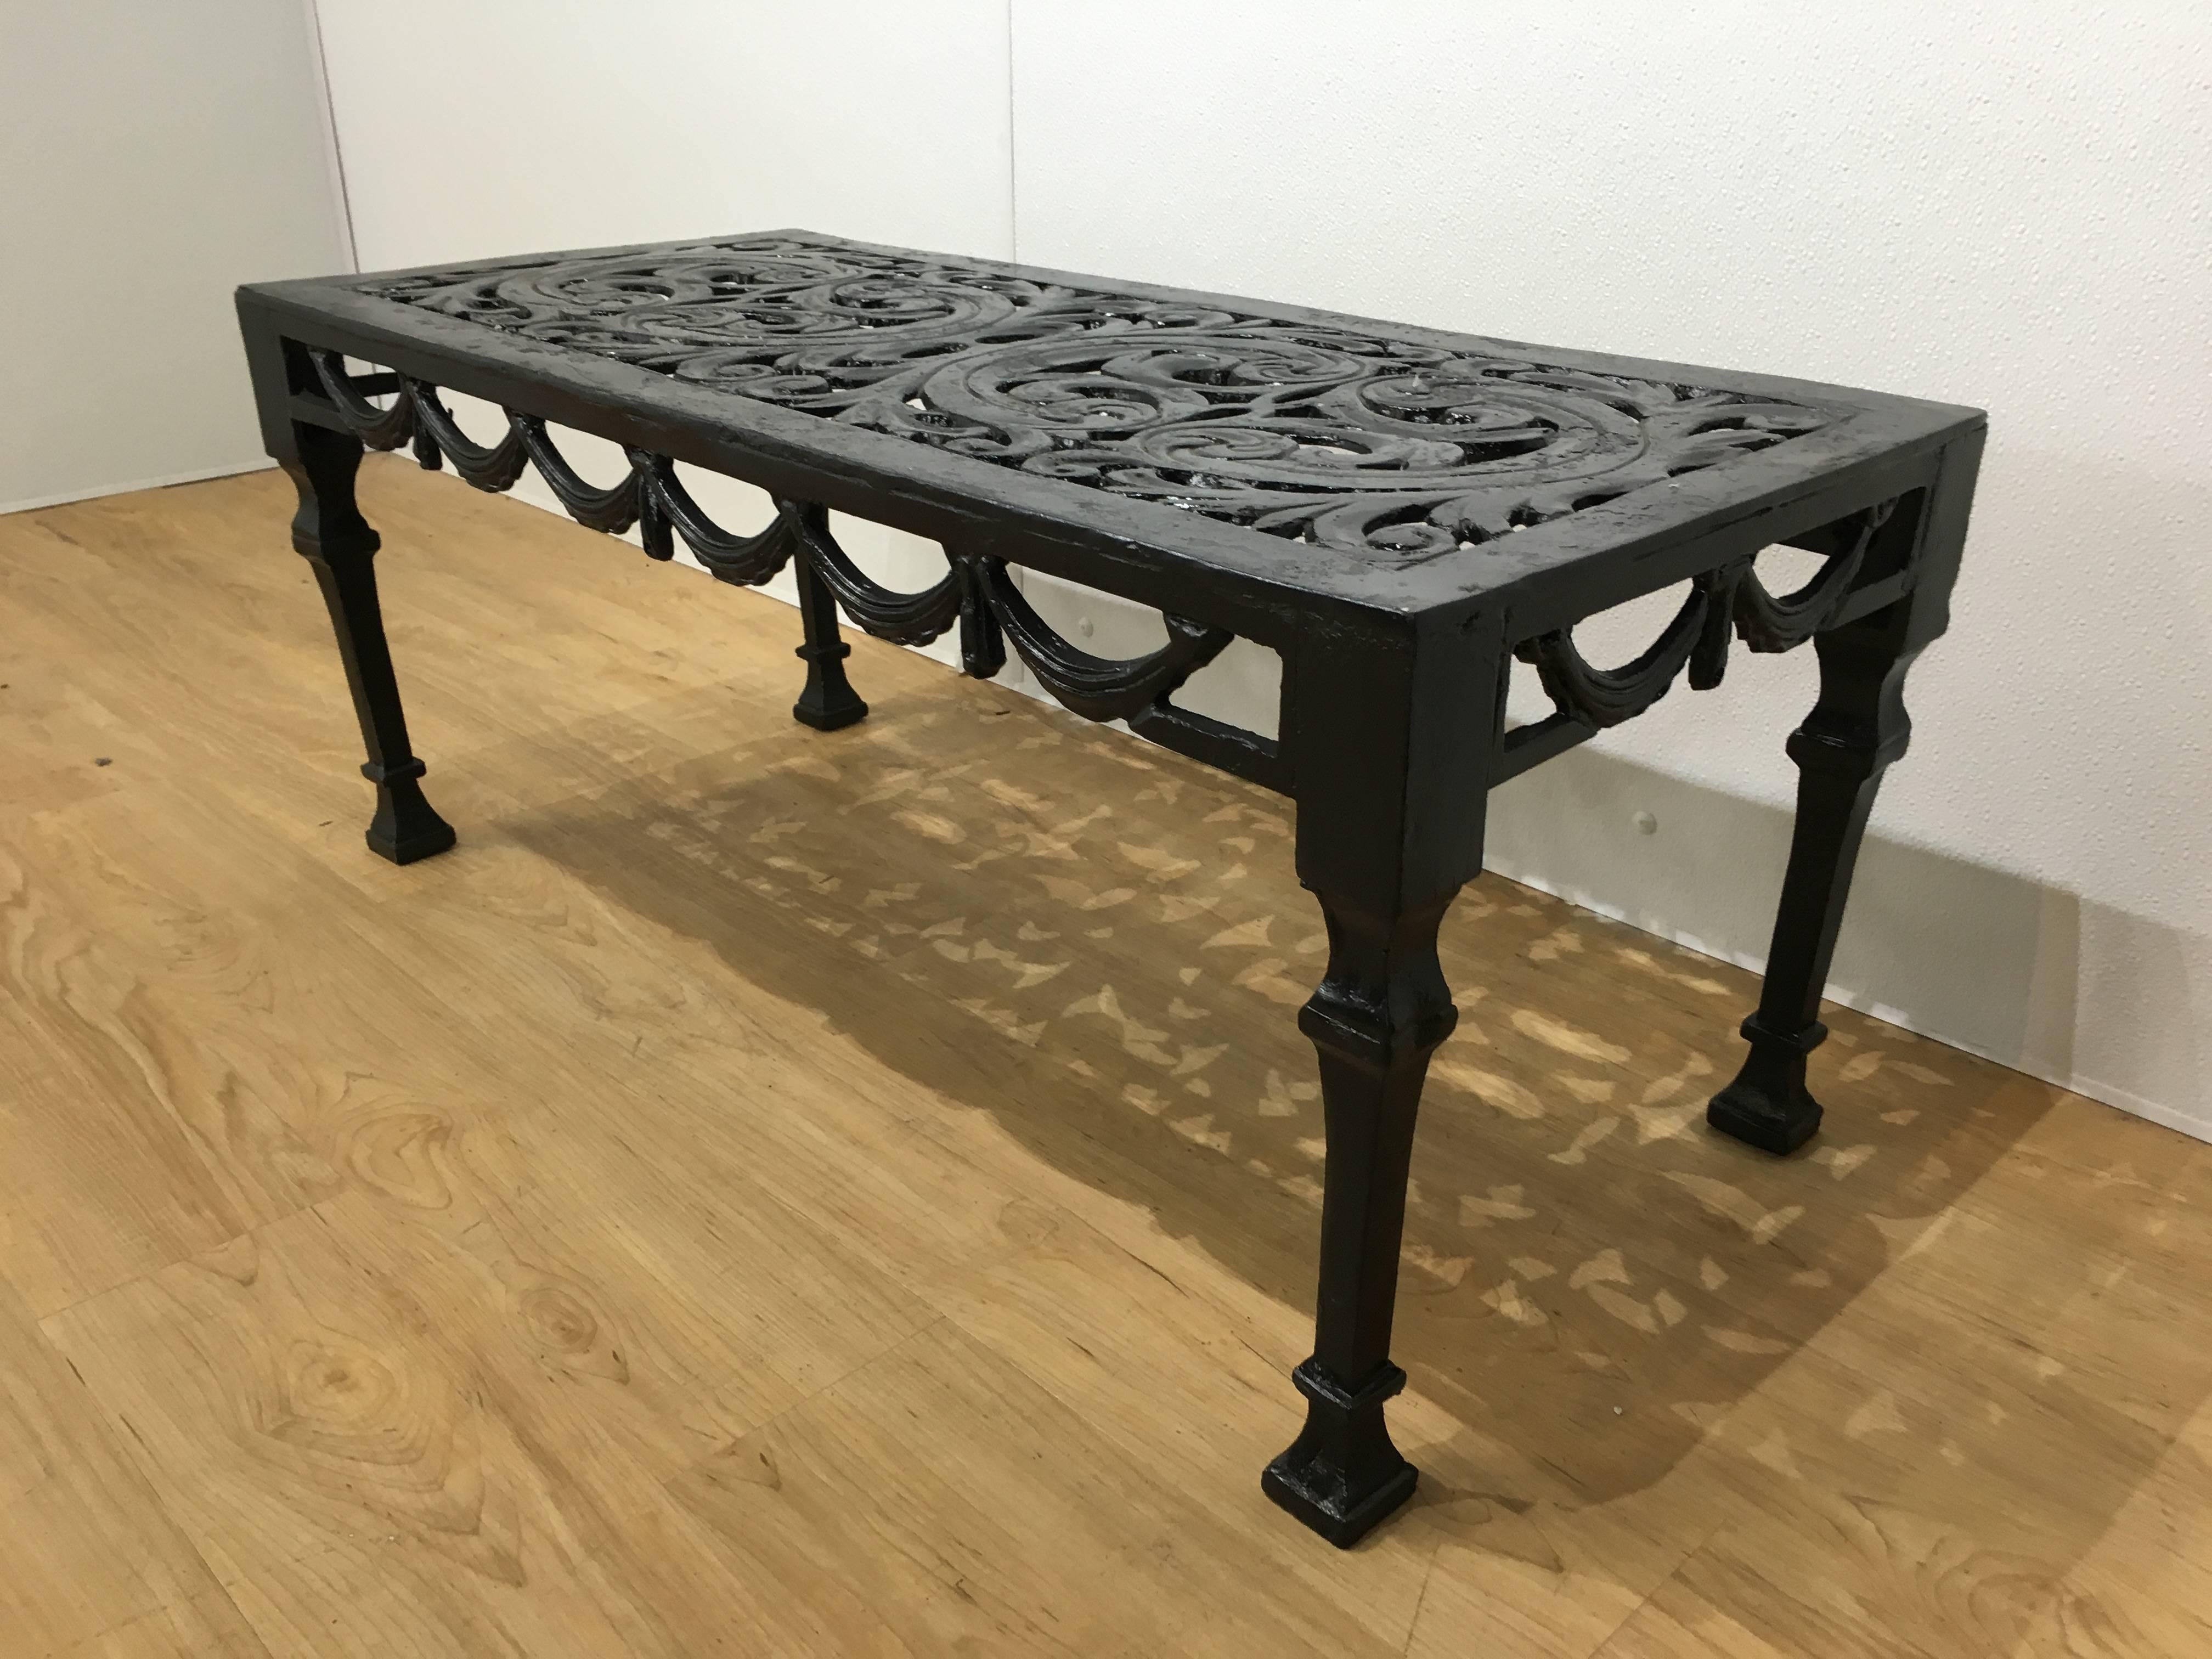 Molla neoclassical cocktail table, of rectangular form with pierced top and sides. Retains original weathered finish with new enamel paint.
We have the coordinating side table, dining table and chairs in our inventory. Please contact us for further